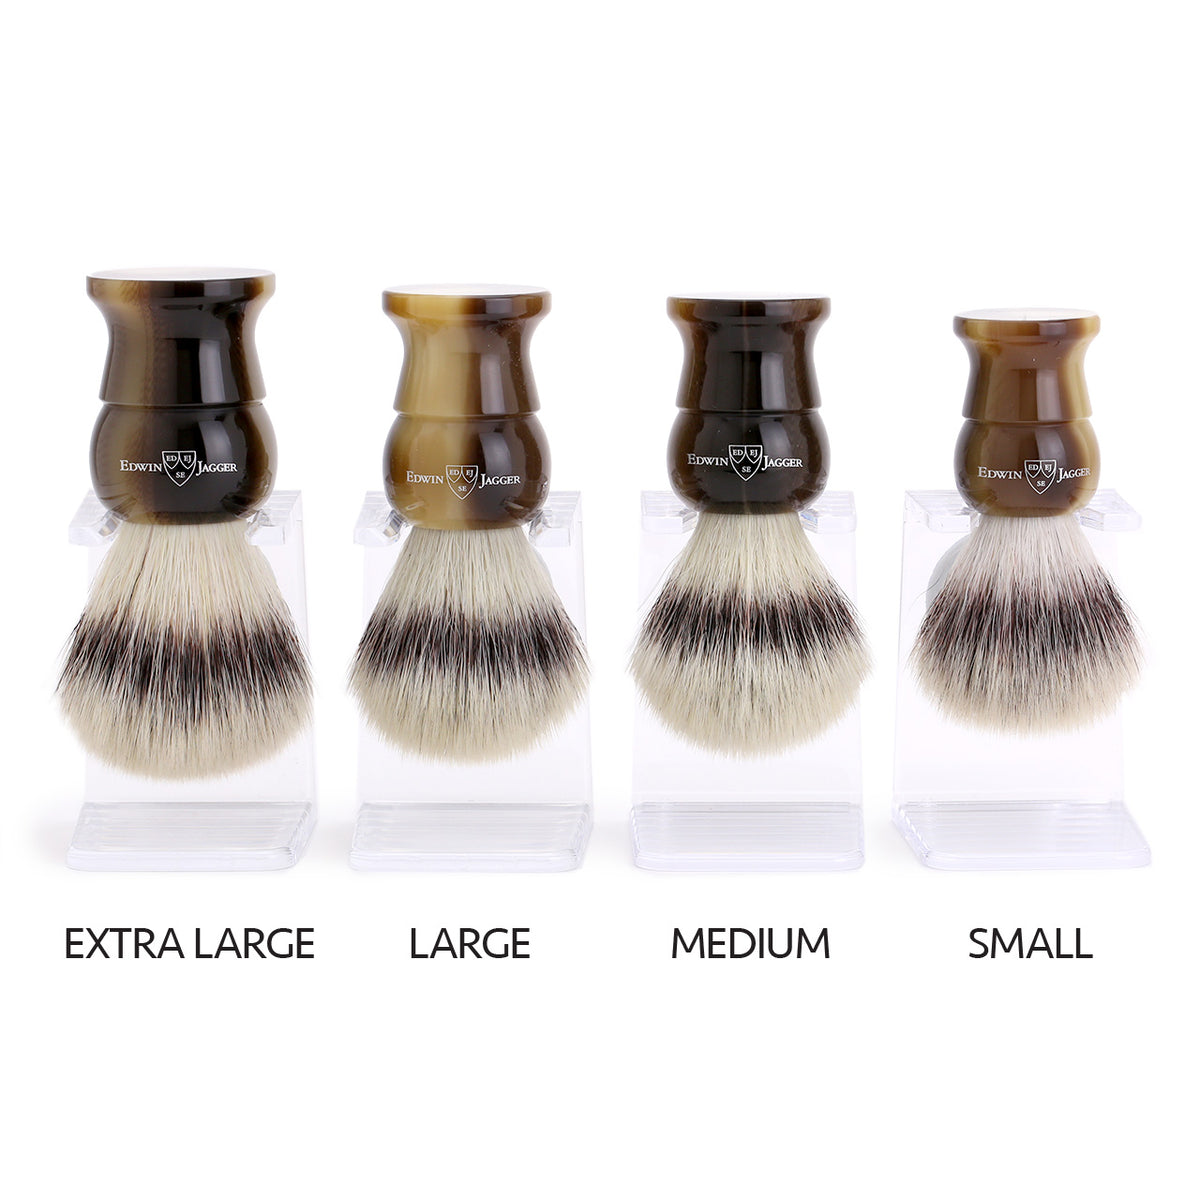 Edwin Jagger Cruelty-Free Horn shaving brushes comparison of 4 sizes